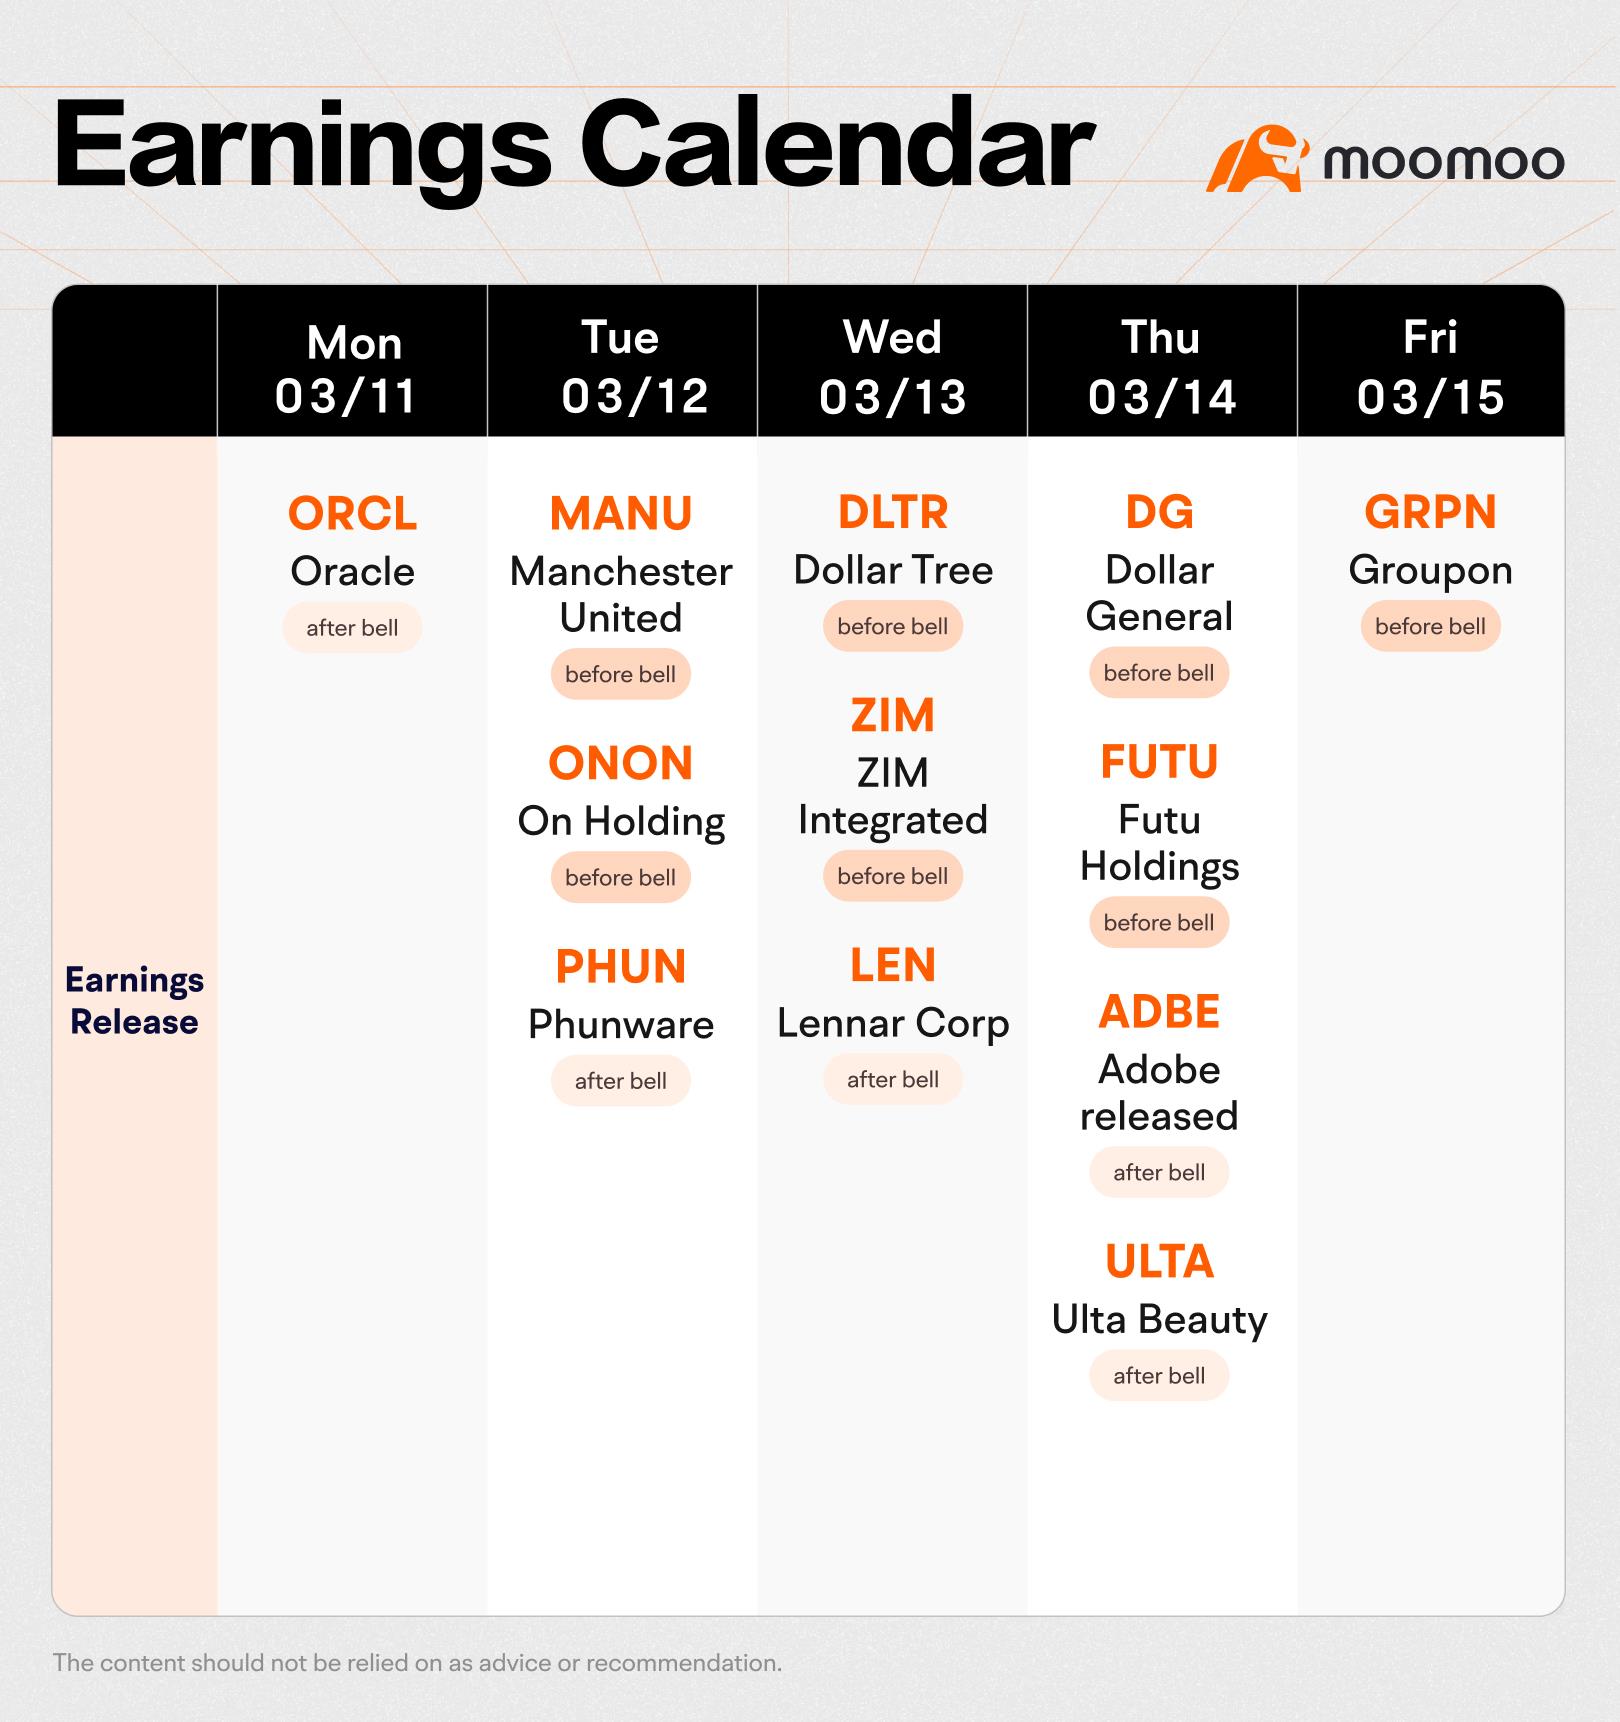 What to Expect in the Week Ahead (ORCL and ADBE Earnings; Inflation and Retail Sales Data)